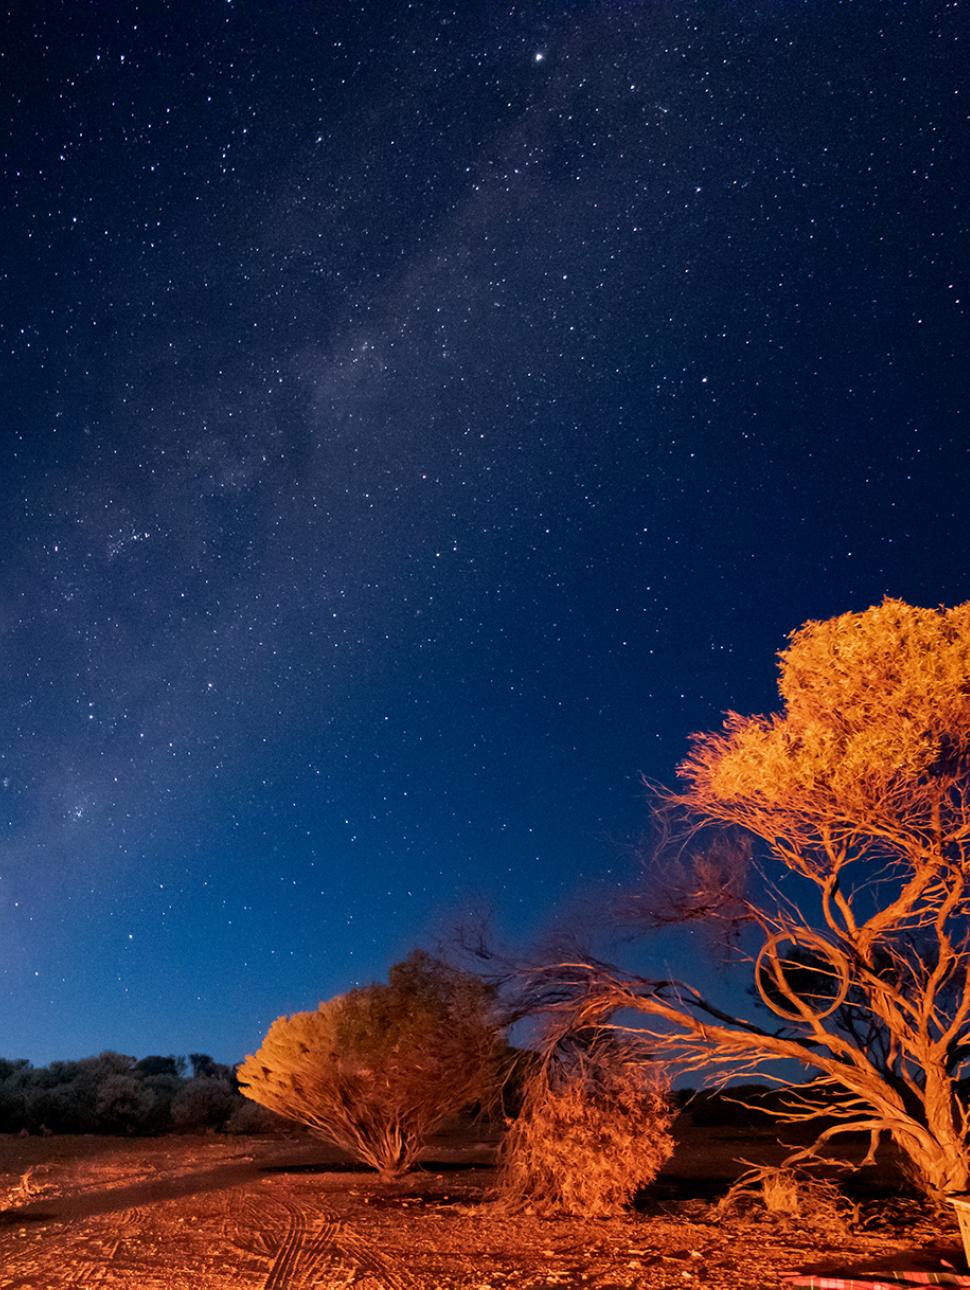 Trees in the outback are lit up beneath a starry night sky